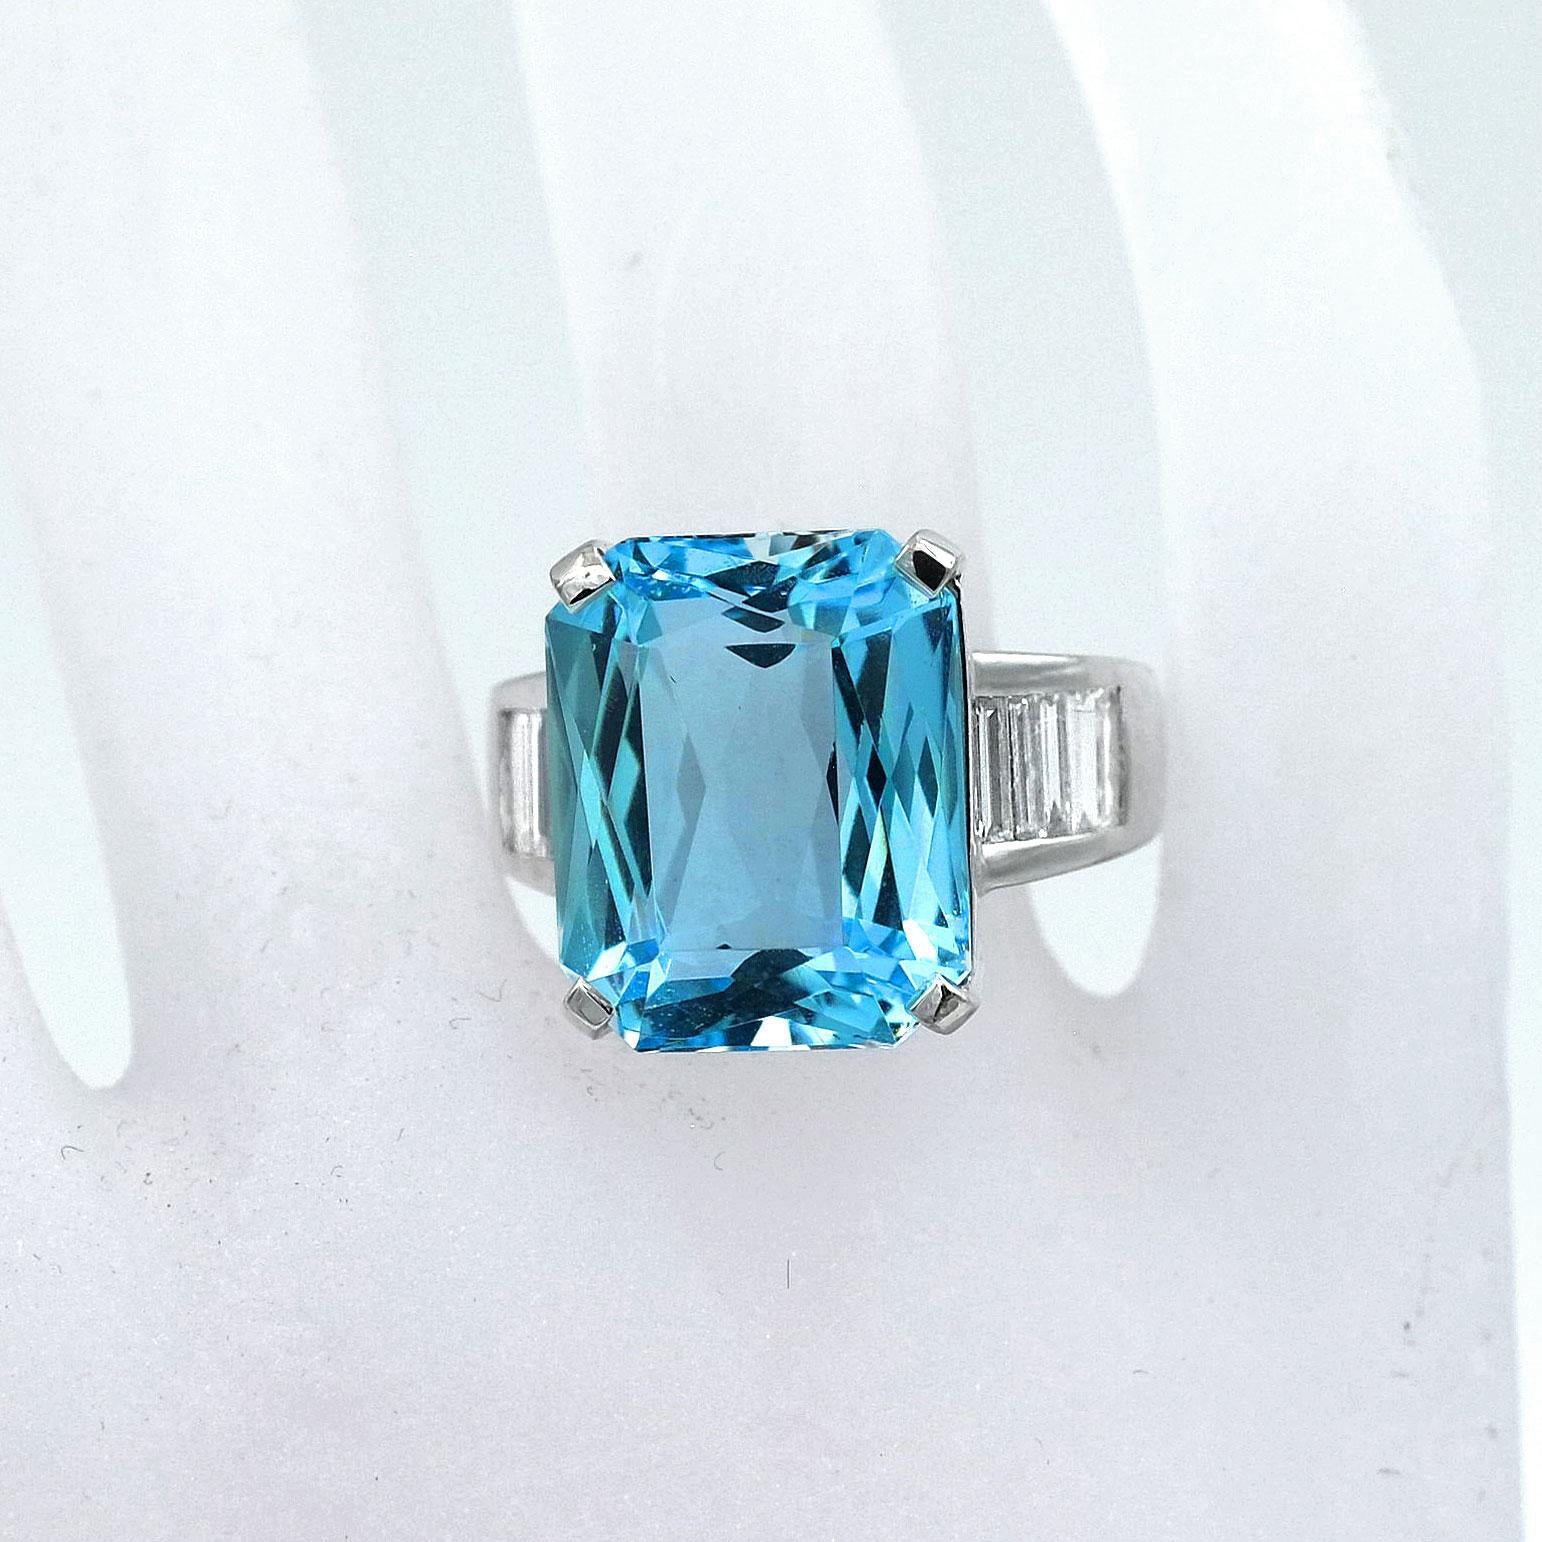 Certified 12 Carat Aquamarine Diamond 18K White Gold Cocktail Ring

Magnificent aquamarine diamond ring made of white gold, the rectangular ring head set with a 12-carat aquamarine of clear sky-blue colour, each flanked by five baguette-cut diamonds